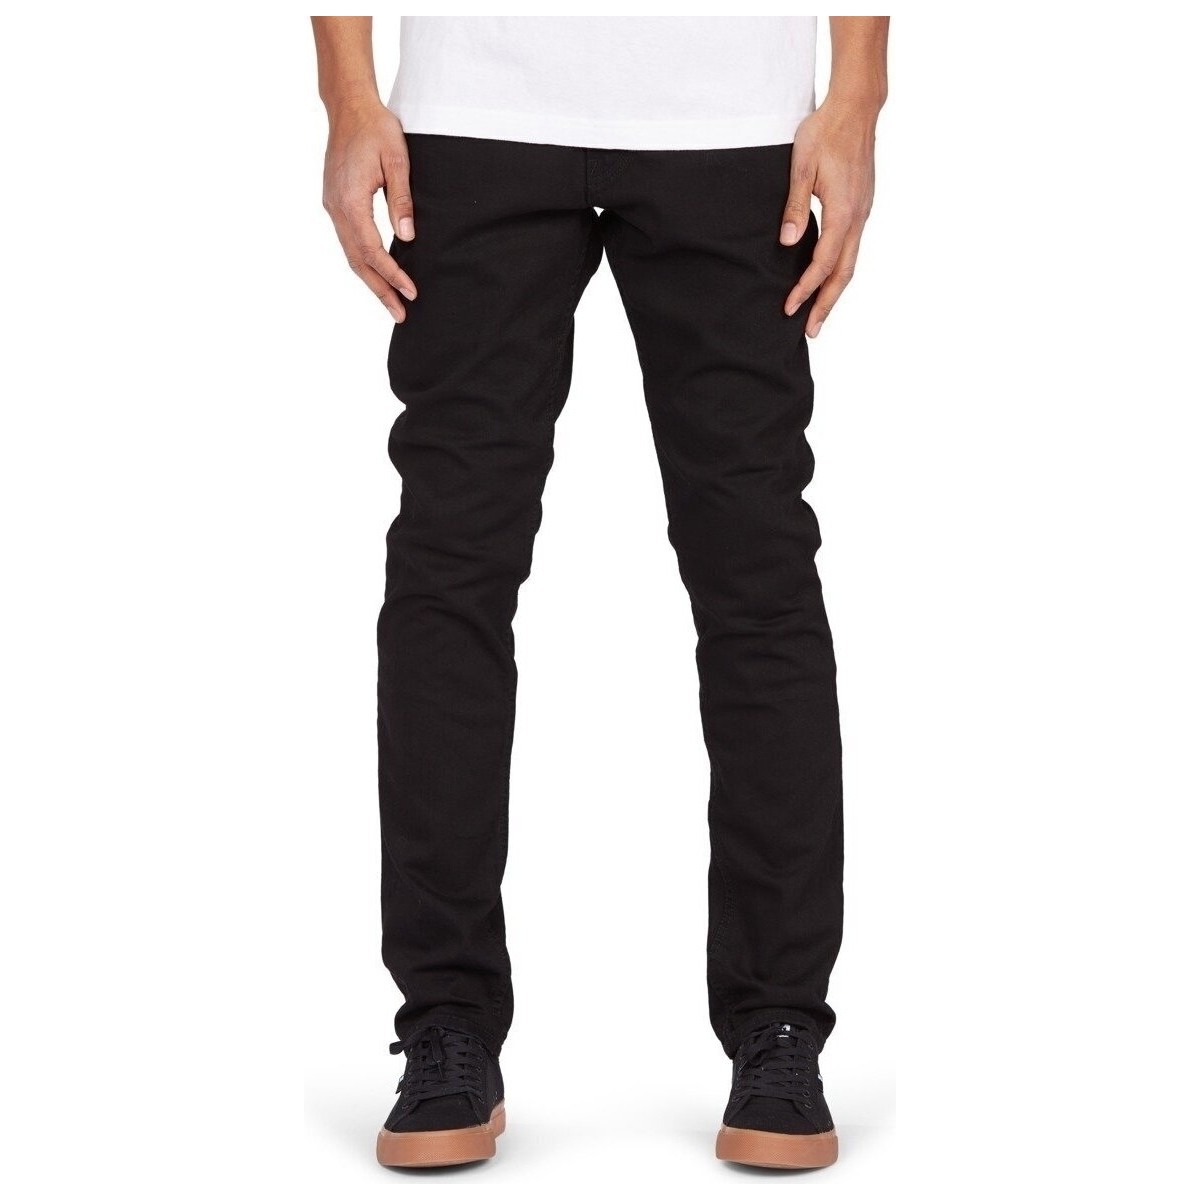 Jeans DC Shoes Worker Slim Fit